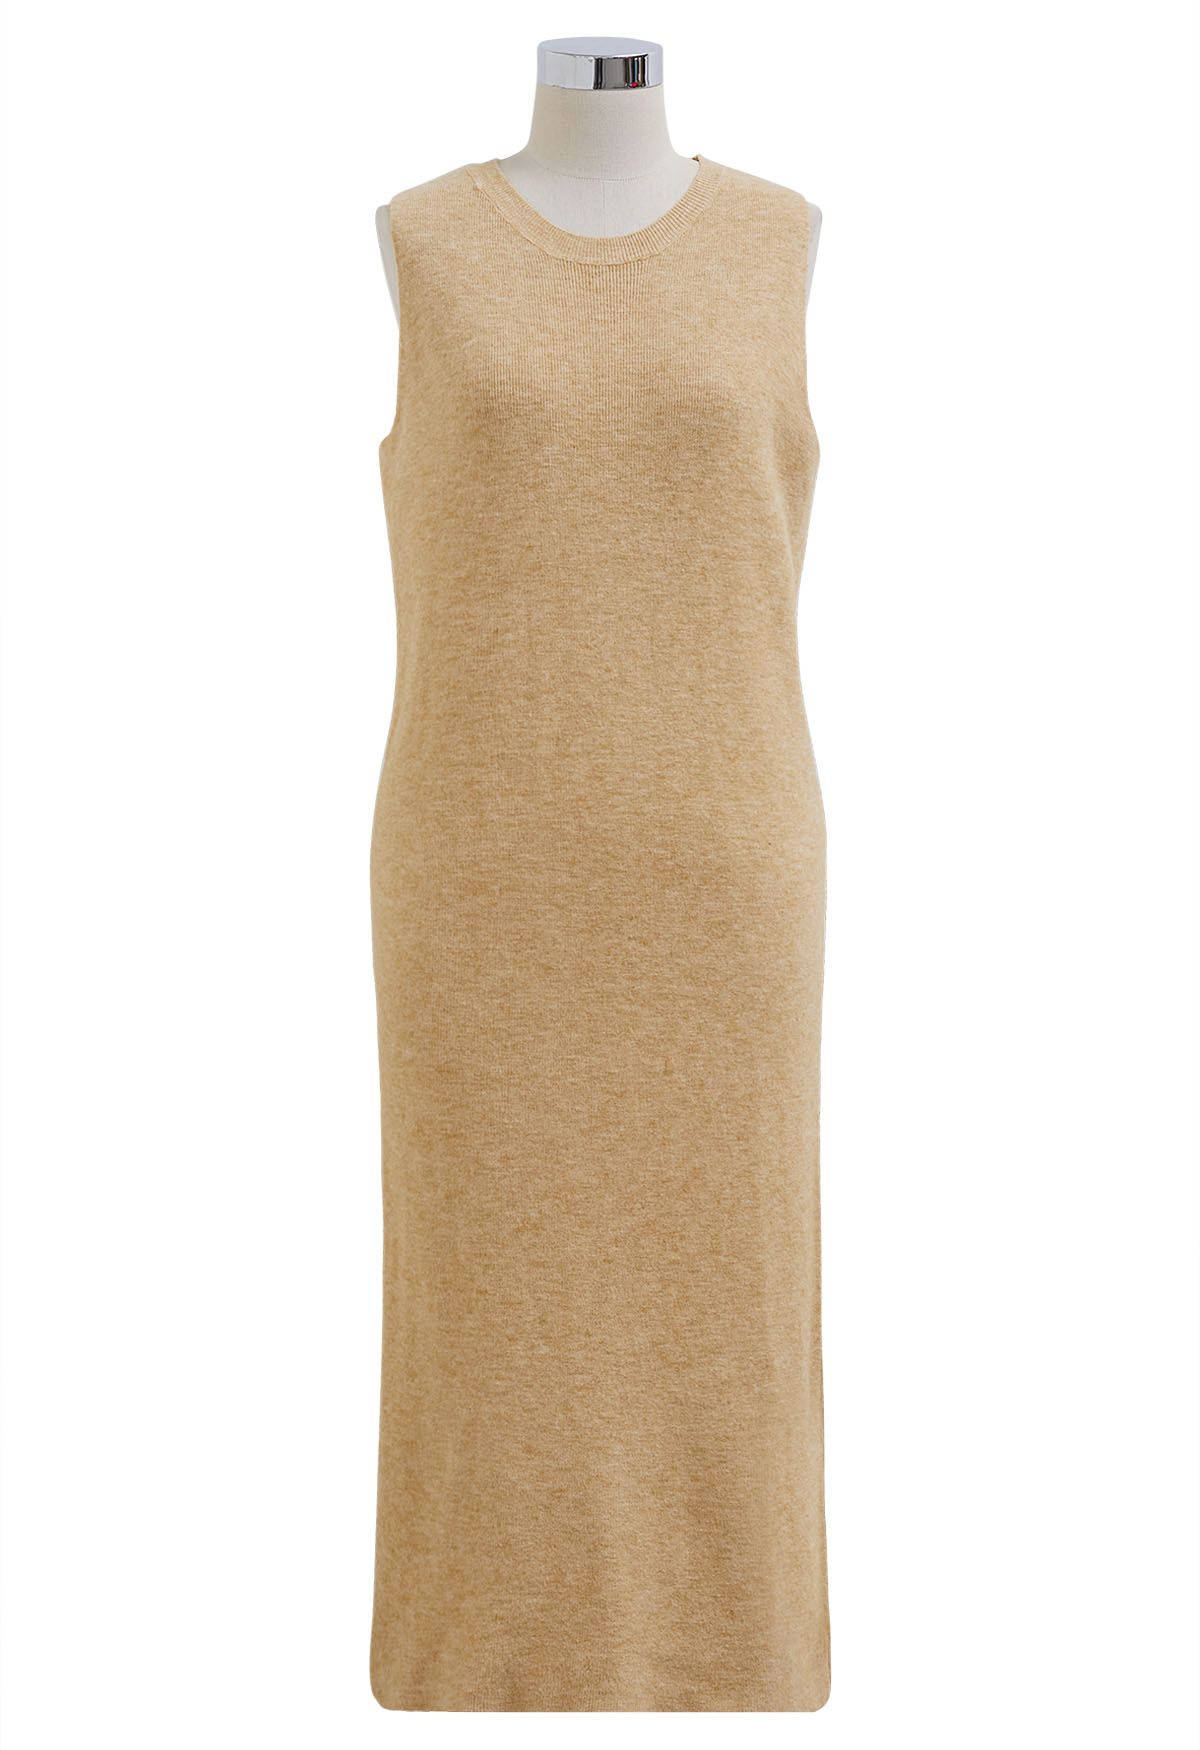 Casual Wool-Blend Sleeveless Knit Dress and Sweater Sleeve Set in Camel